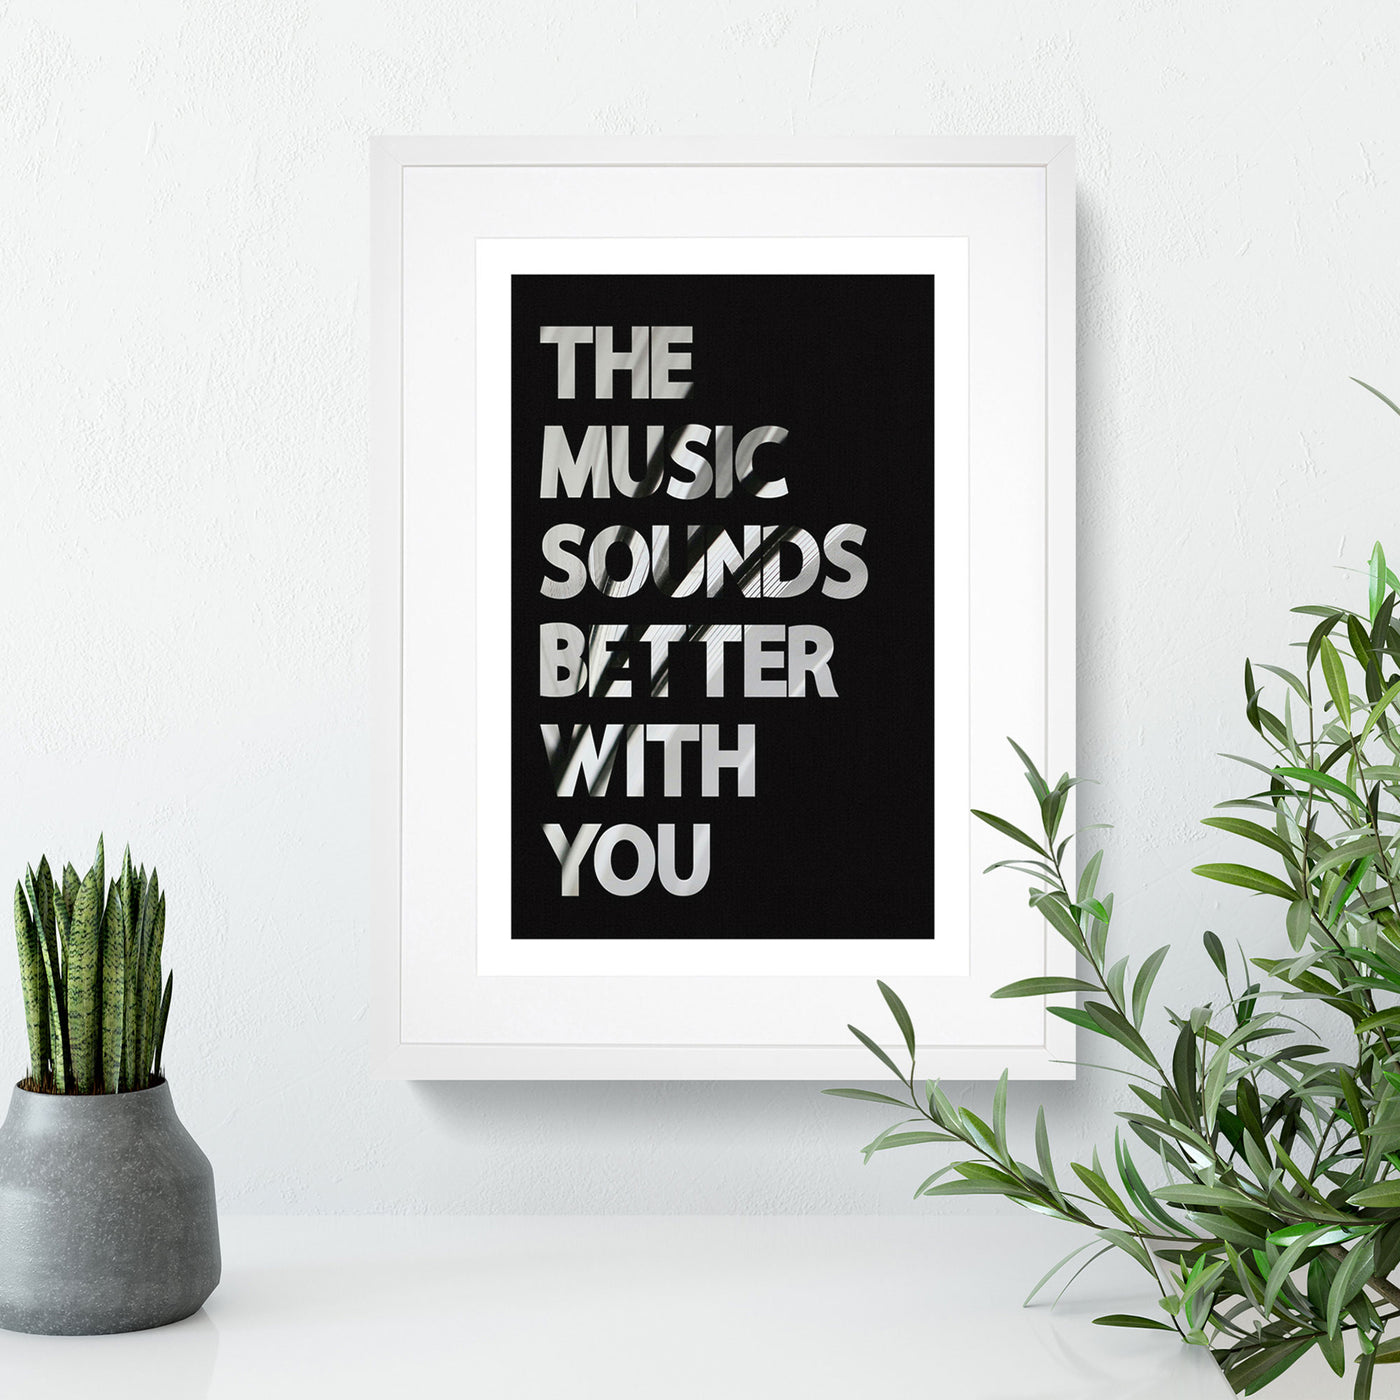 The Music Sounds Better with You